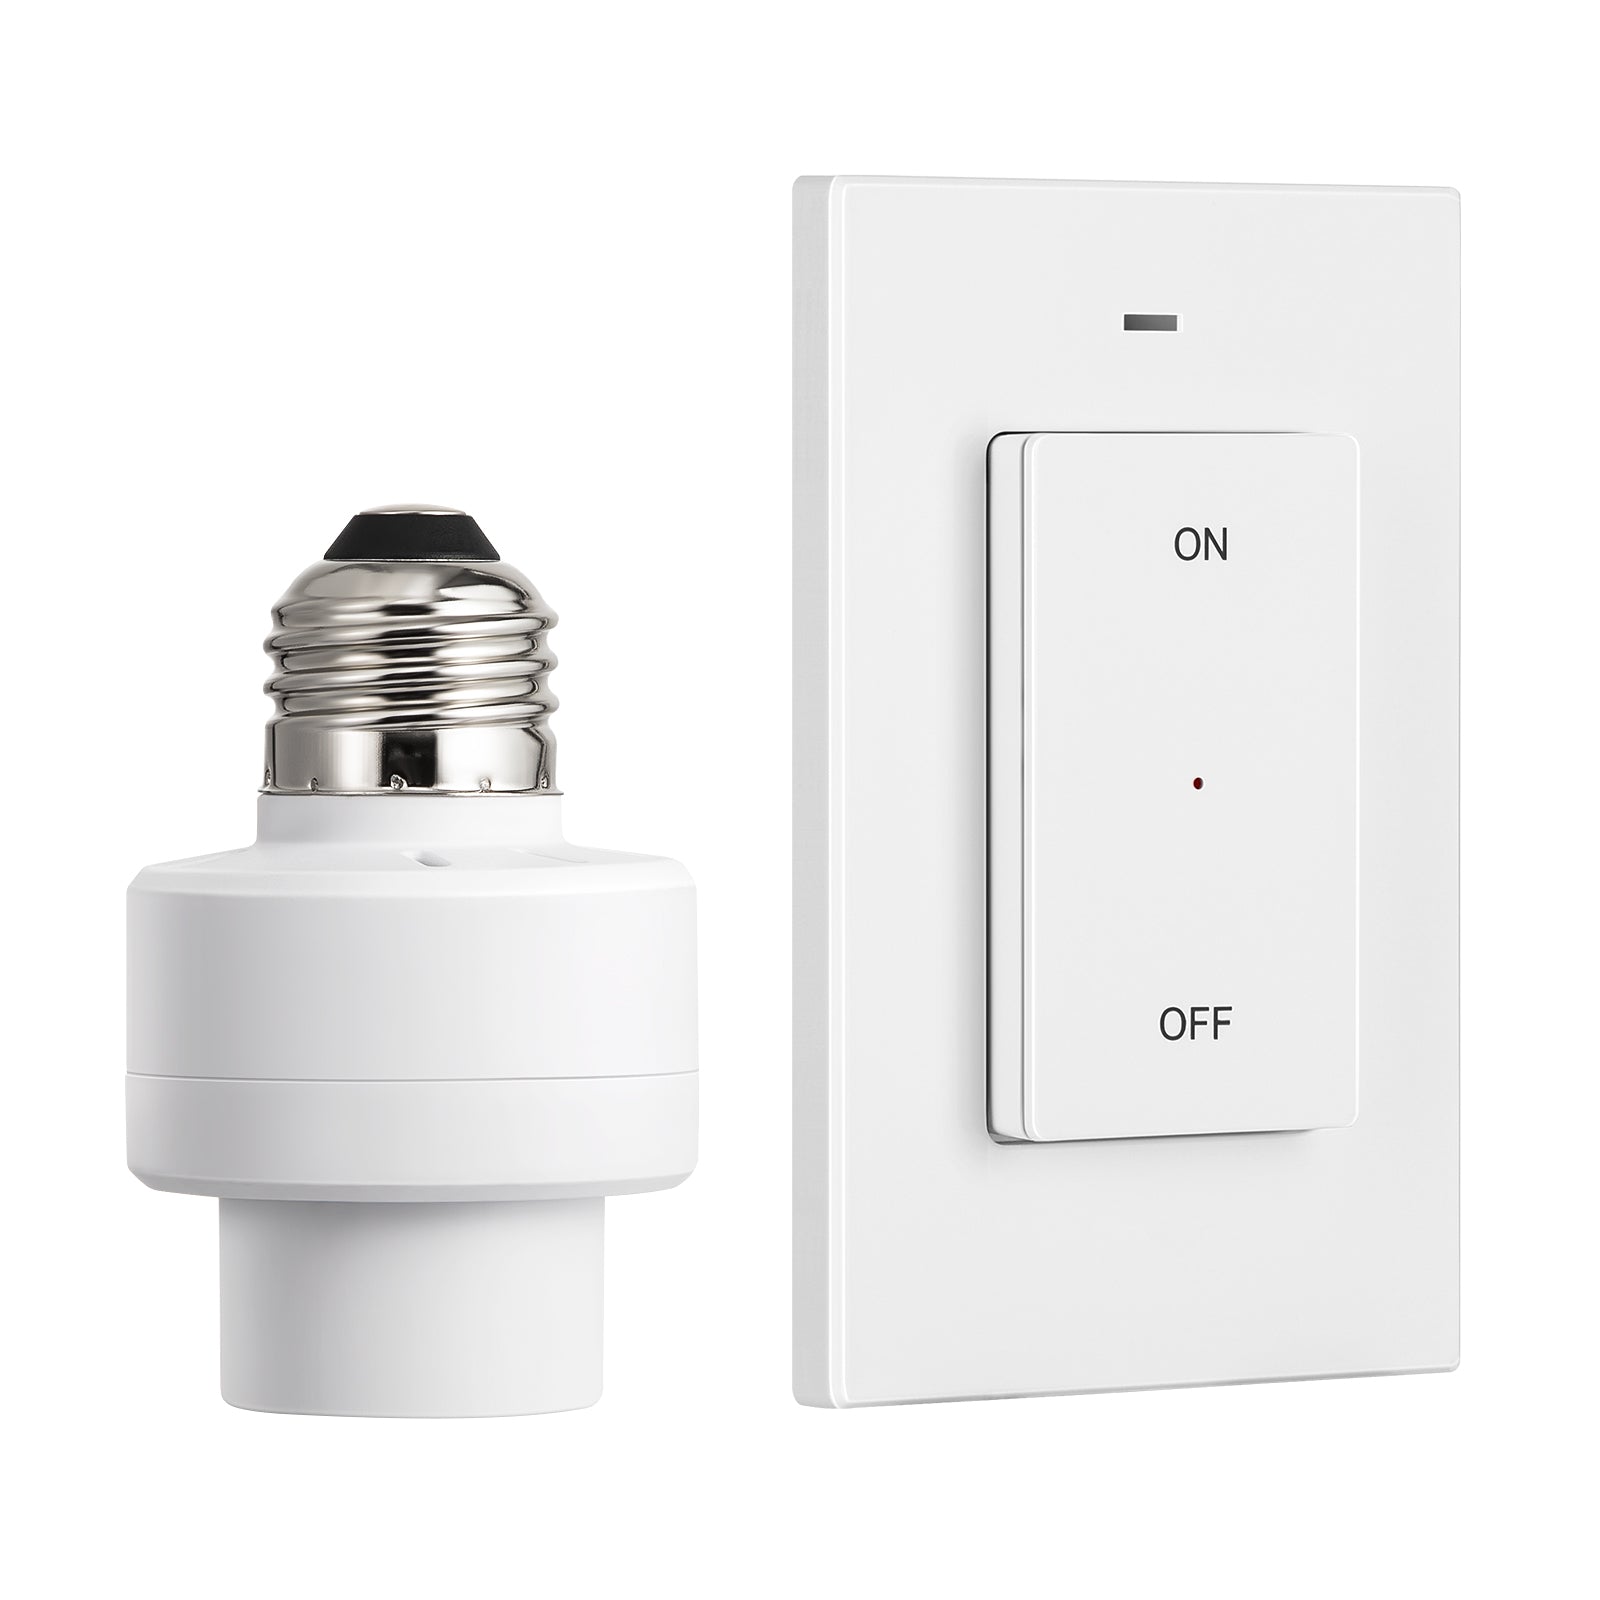 DEWENWILS Remote Control Light Socket, Wireless Light Switch for Pull Chain  Light Lamp Fixtures, 100FT Range, No Wiring Needed, ETL Listed((2 Wall